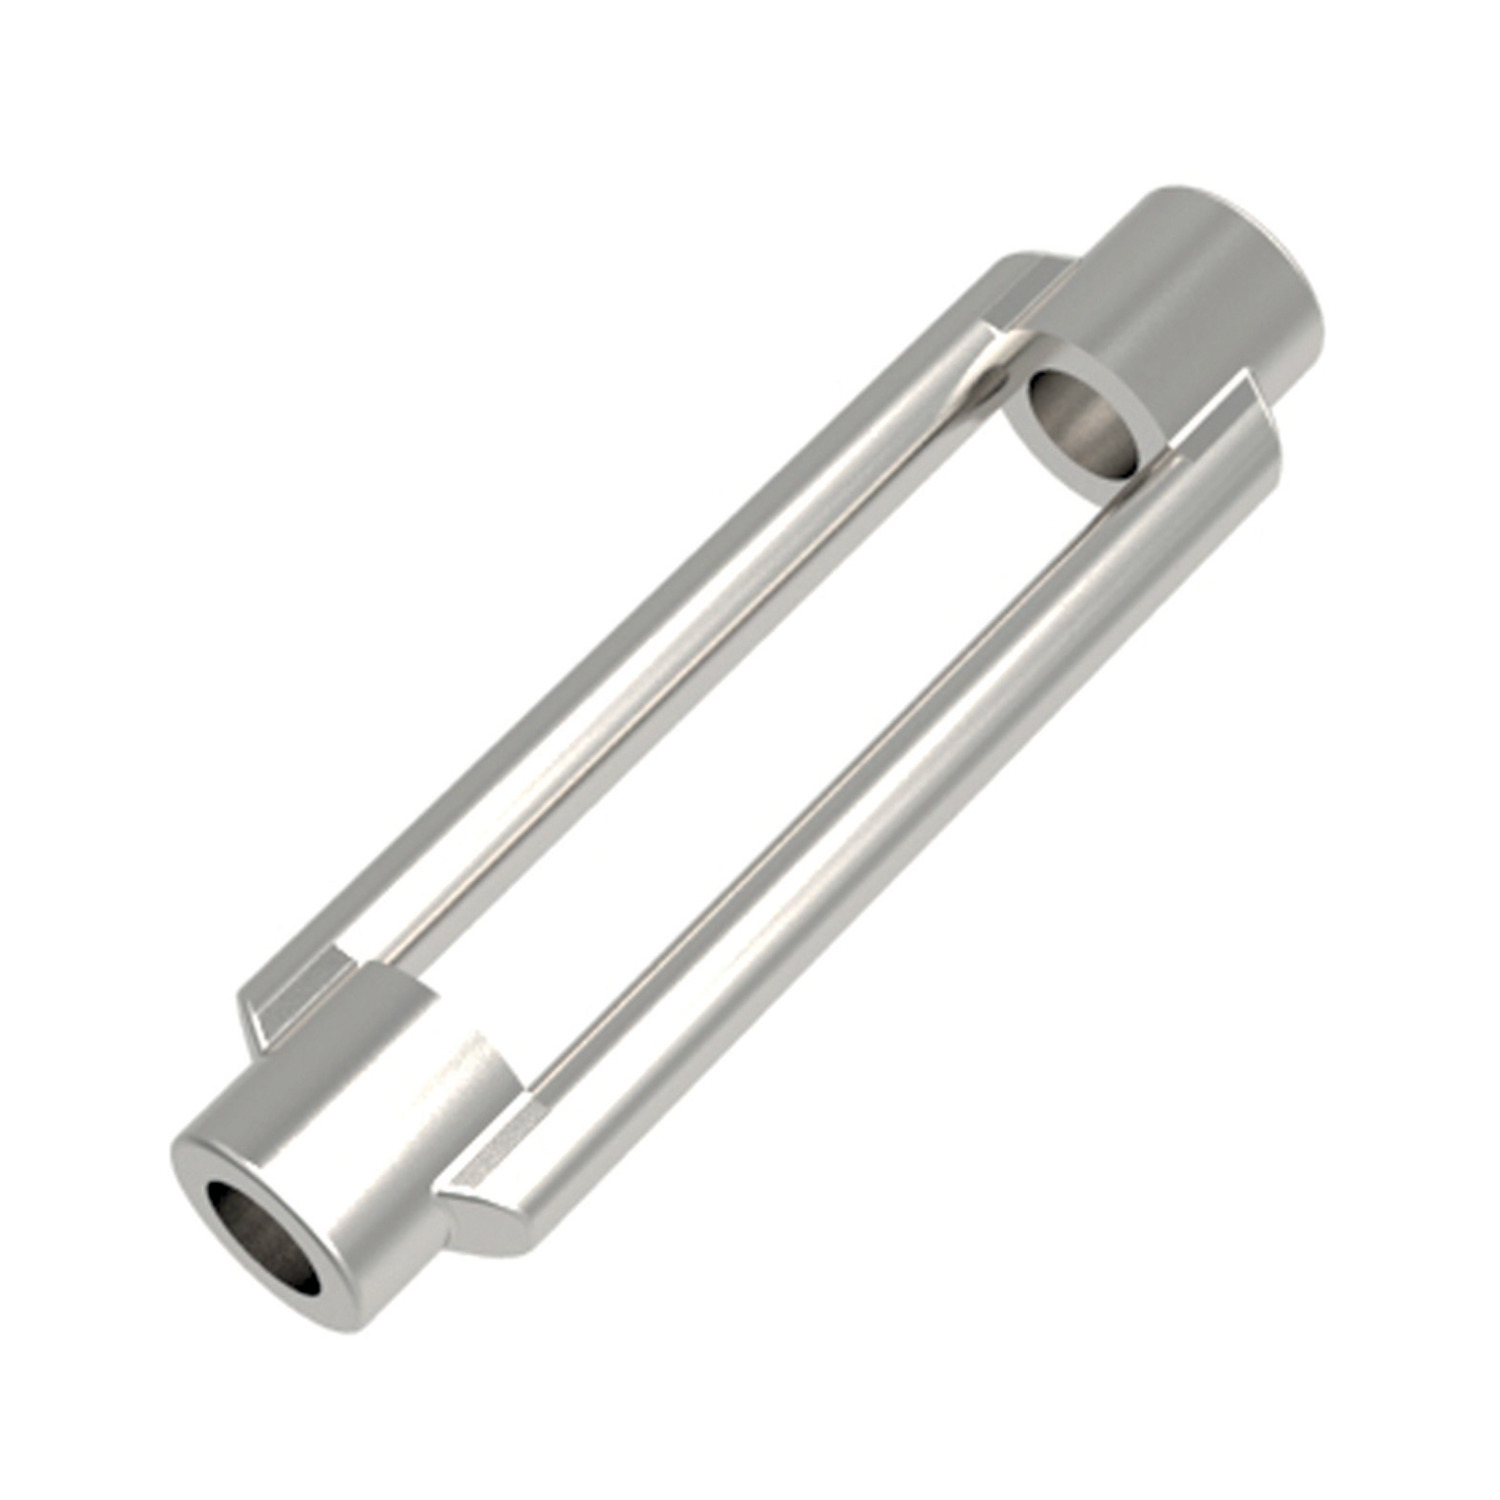 R3832.050-070-A4 Turnbuckles Body M5x70 A4 s/s Not to be used for lifting unless SWL marked.